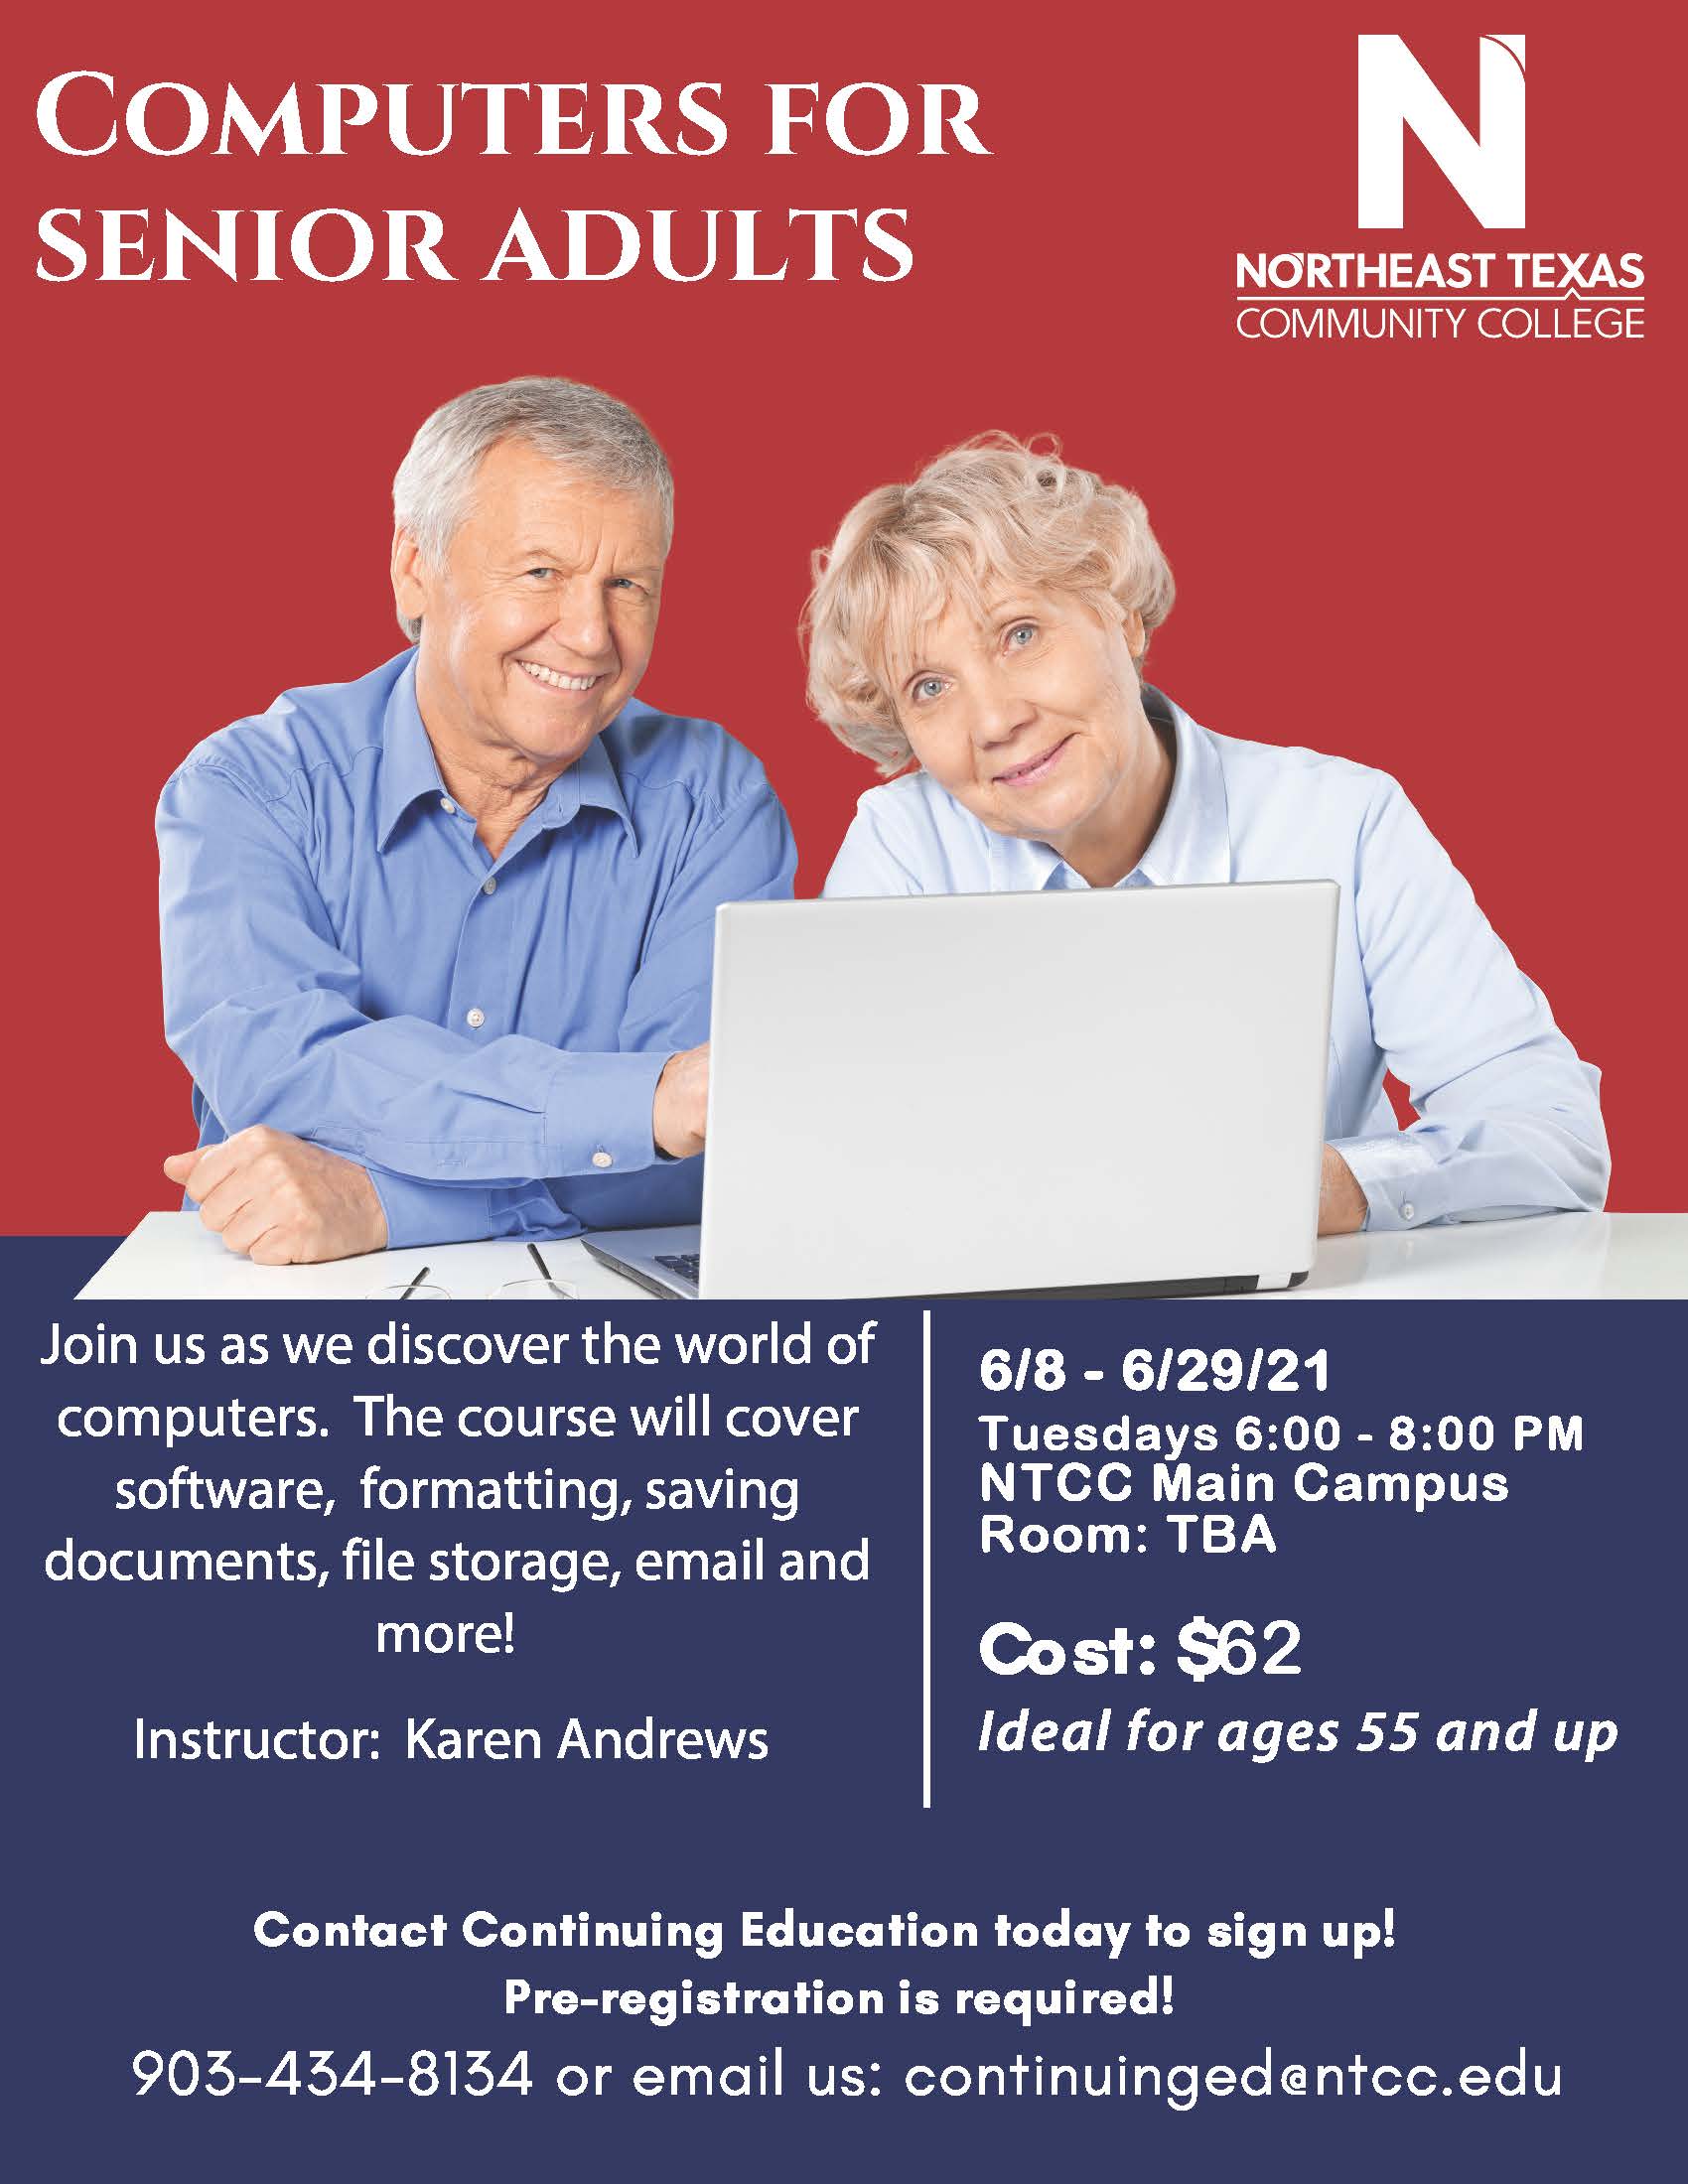 Computers for Senior Adults